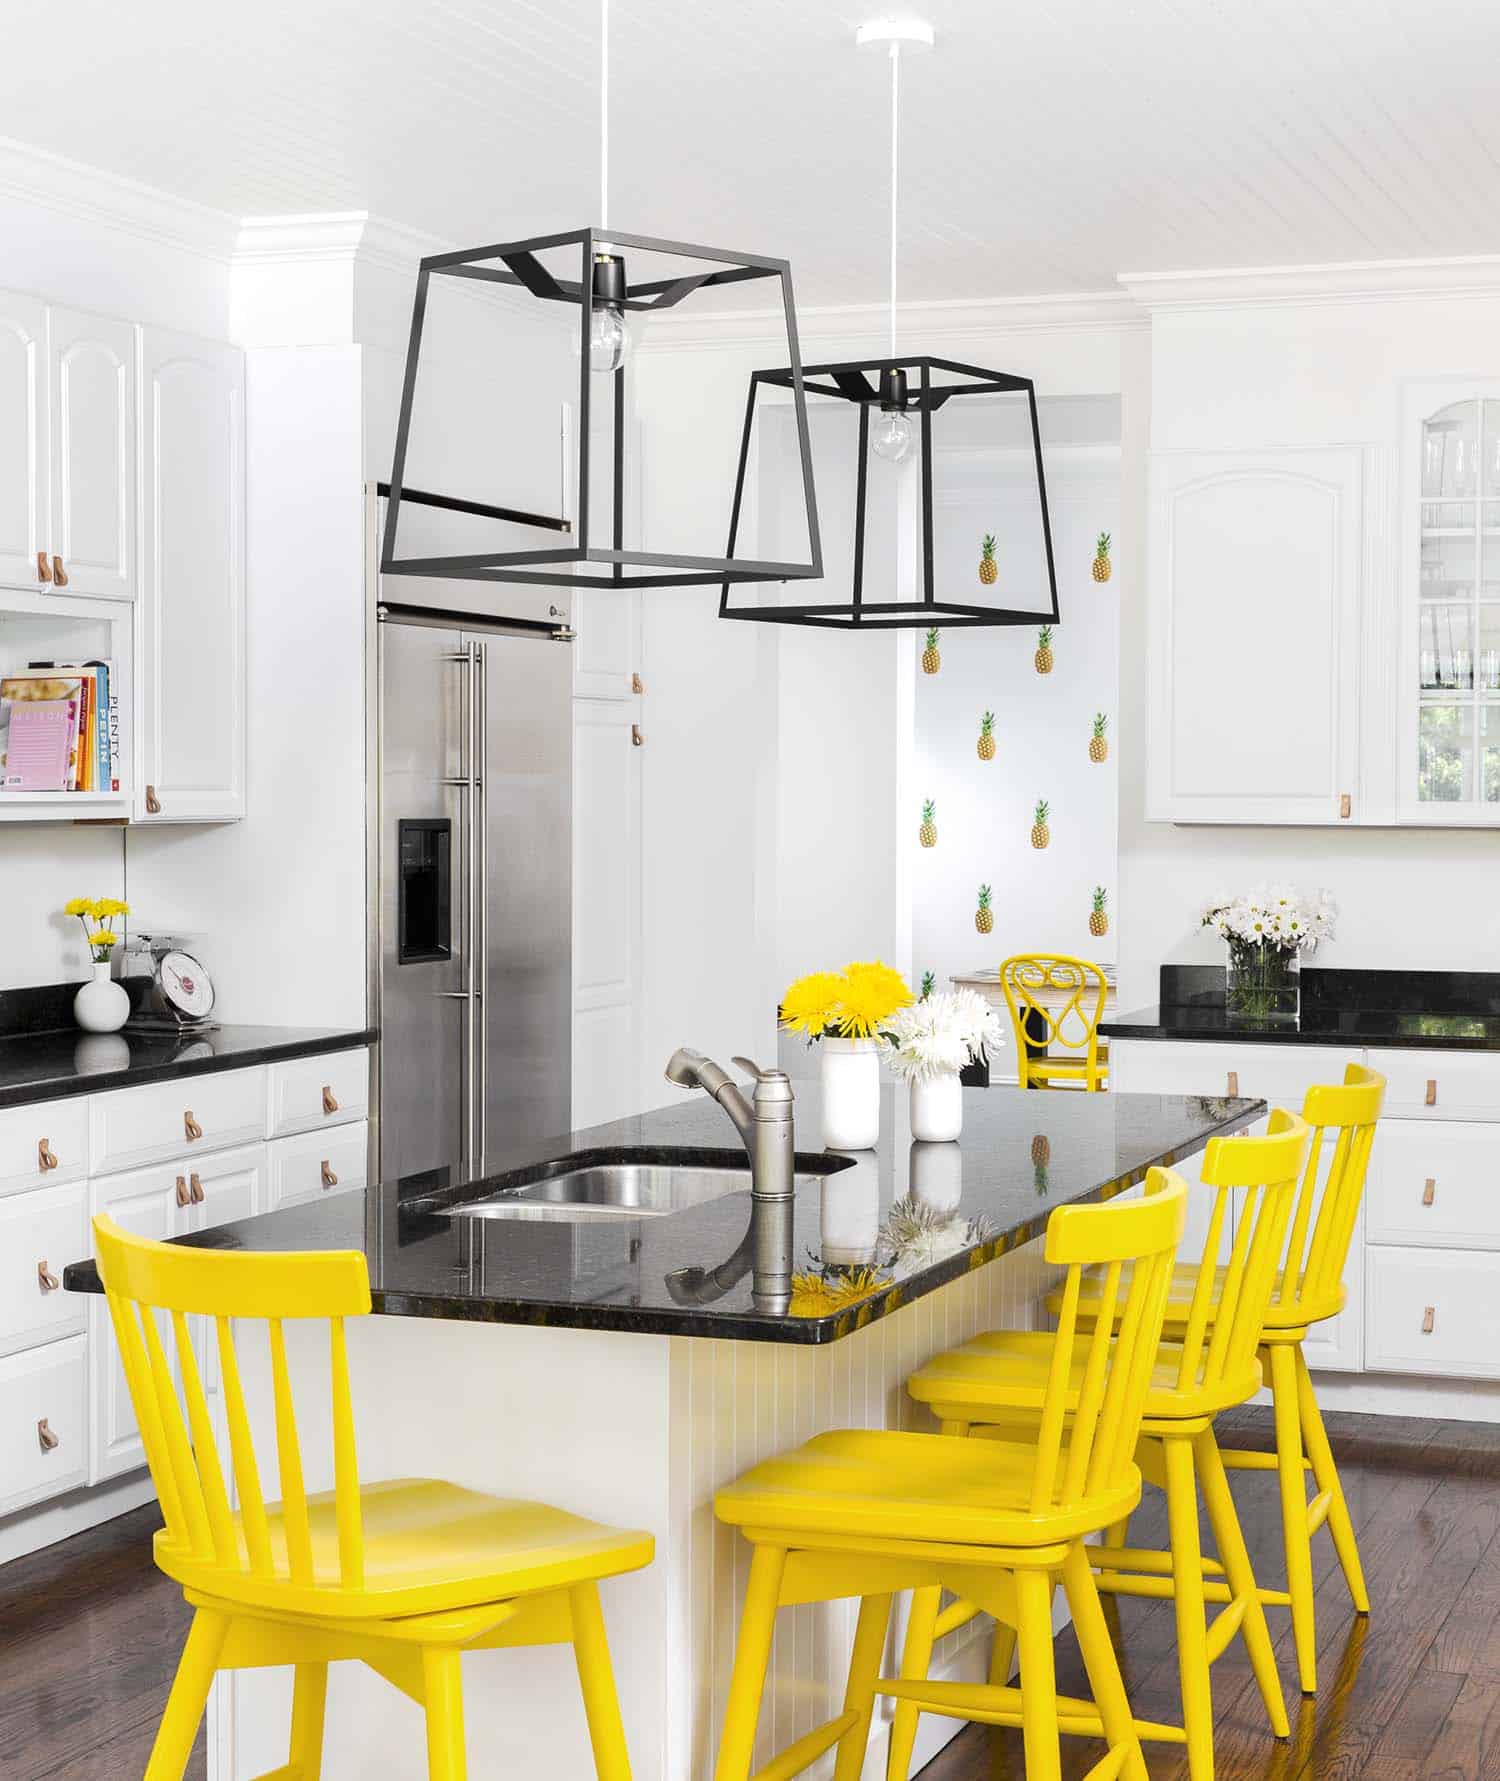 Bright and playful interiors characterizes this Westhampton beach house